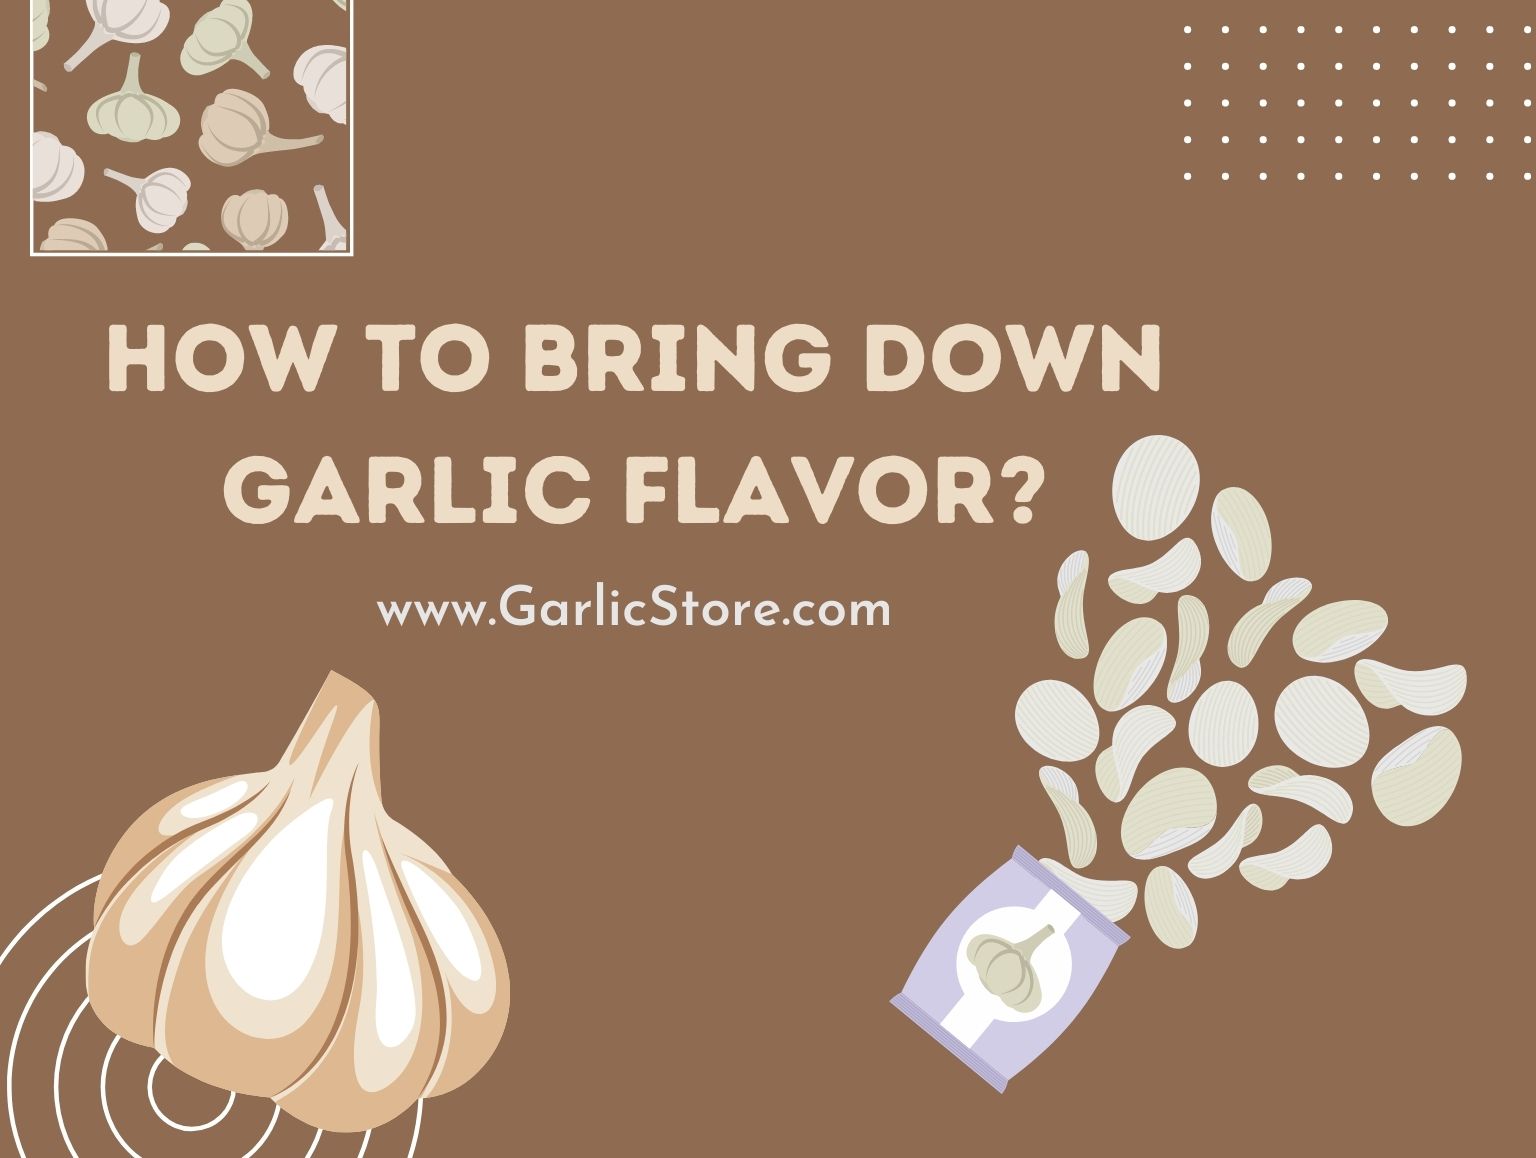 How to Bring Down Garlic Flavor